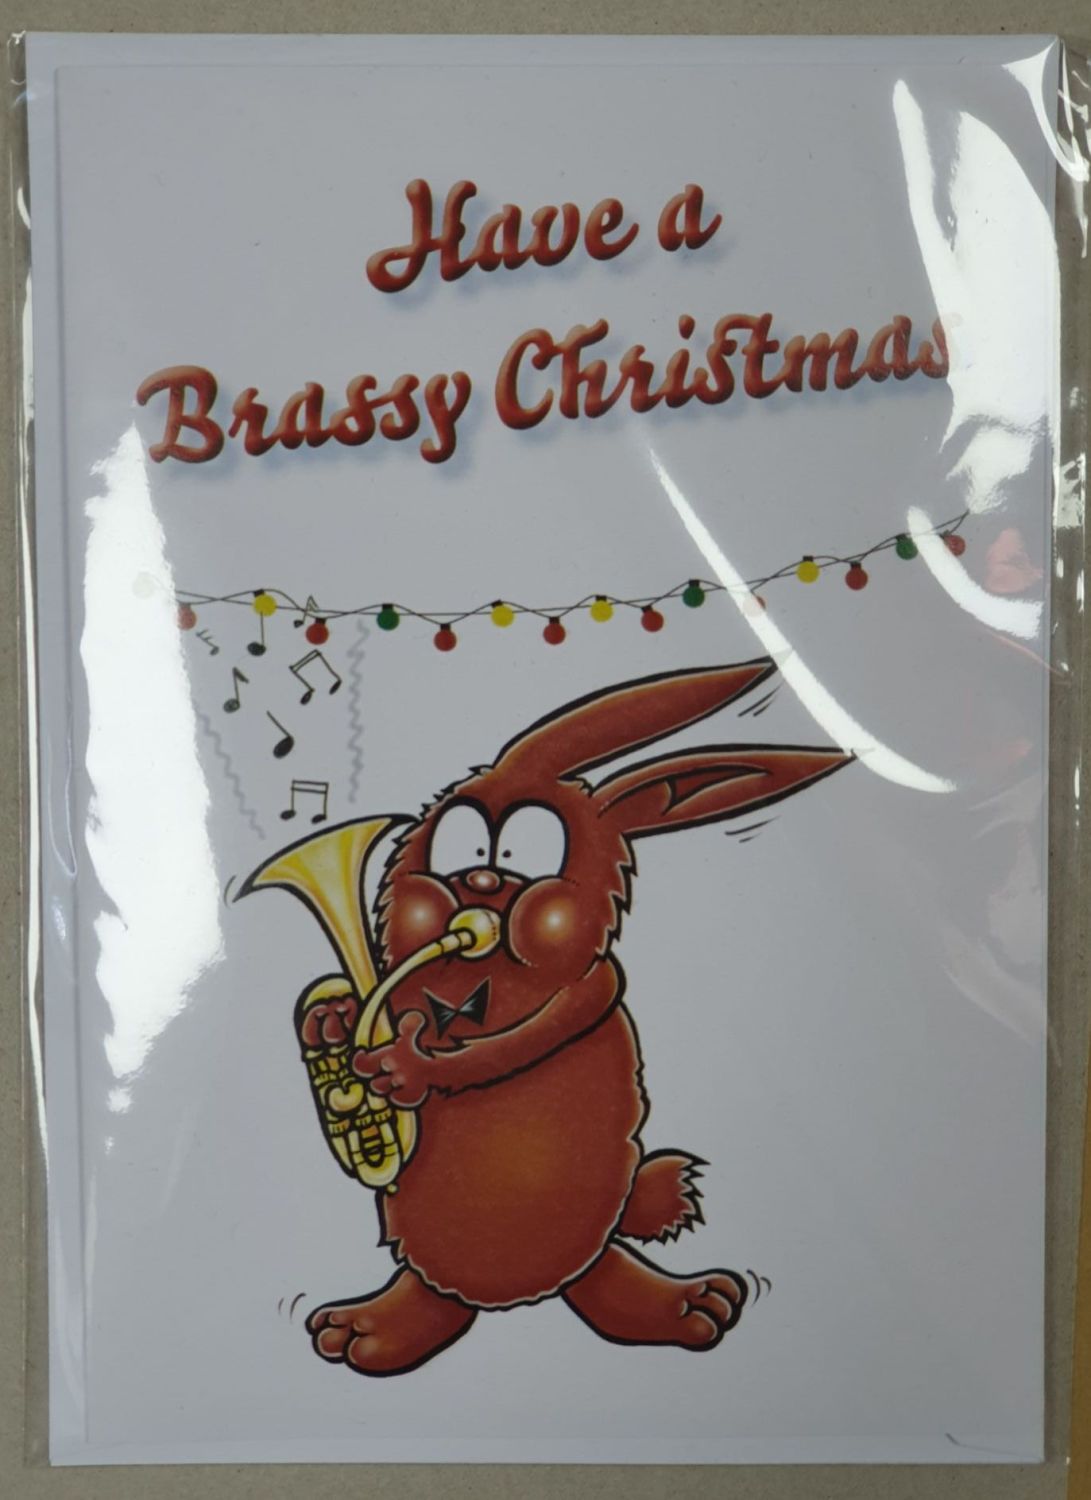 Have A Brassy Christmas - Garland Greeting Card - Rabbit with Tenor Horn